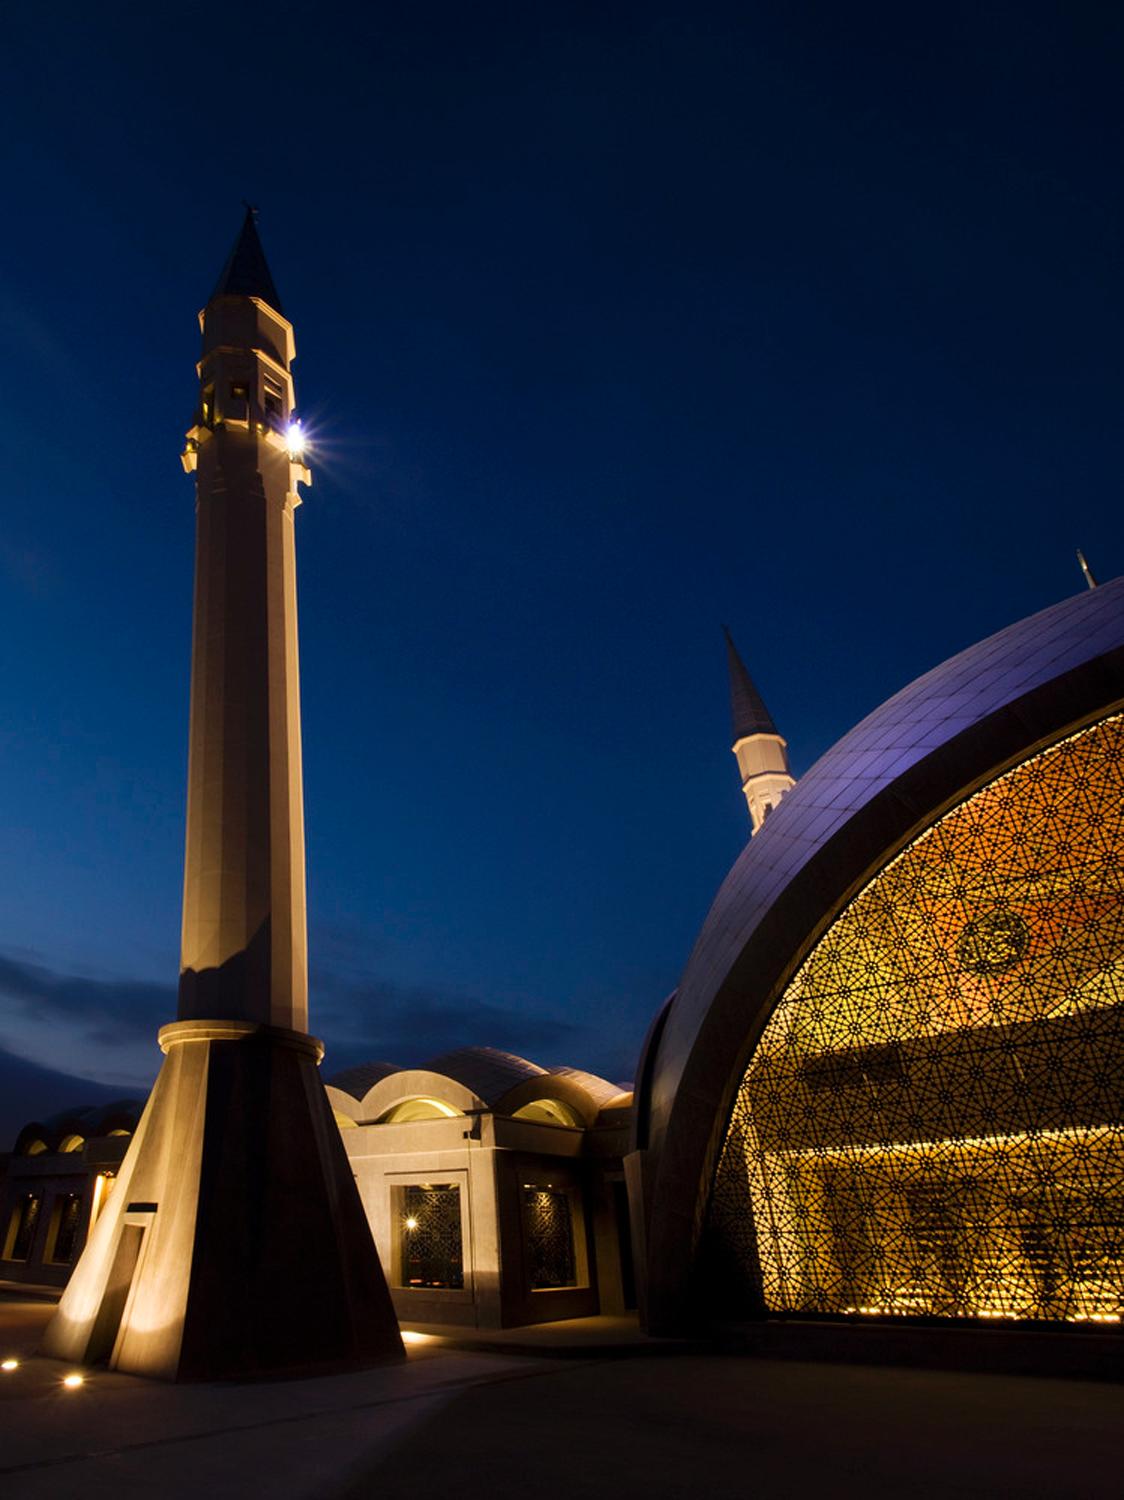 View of the minaret, dome and lighting design